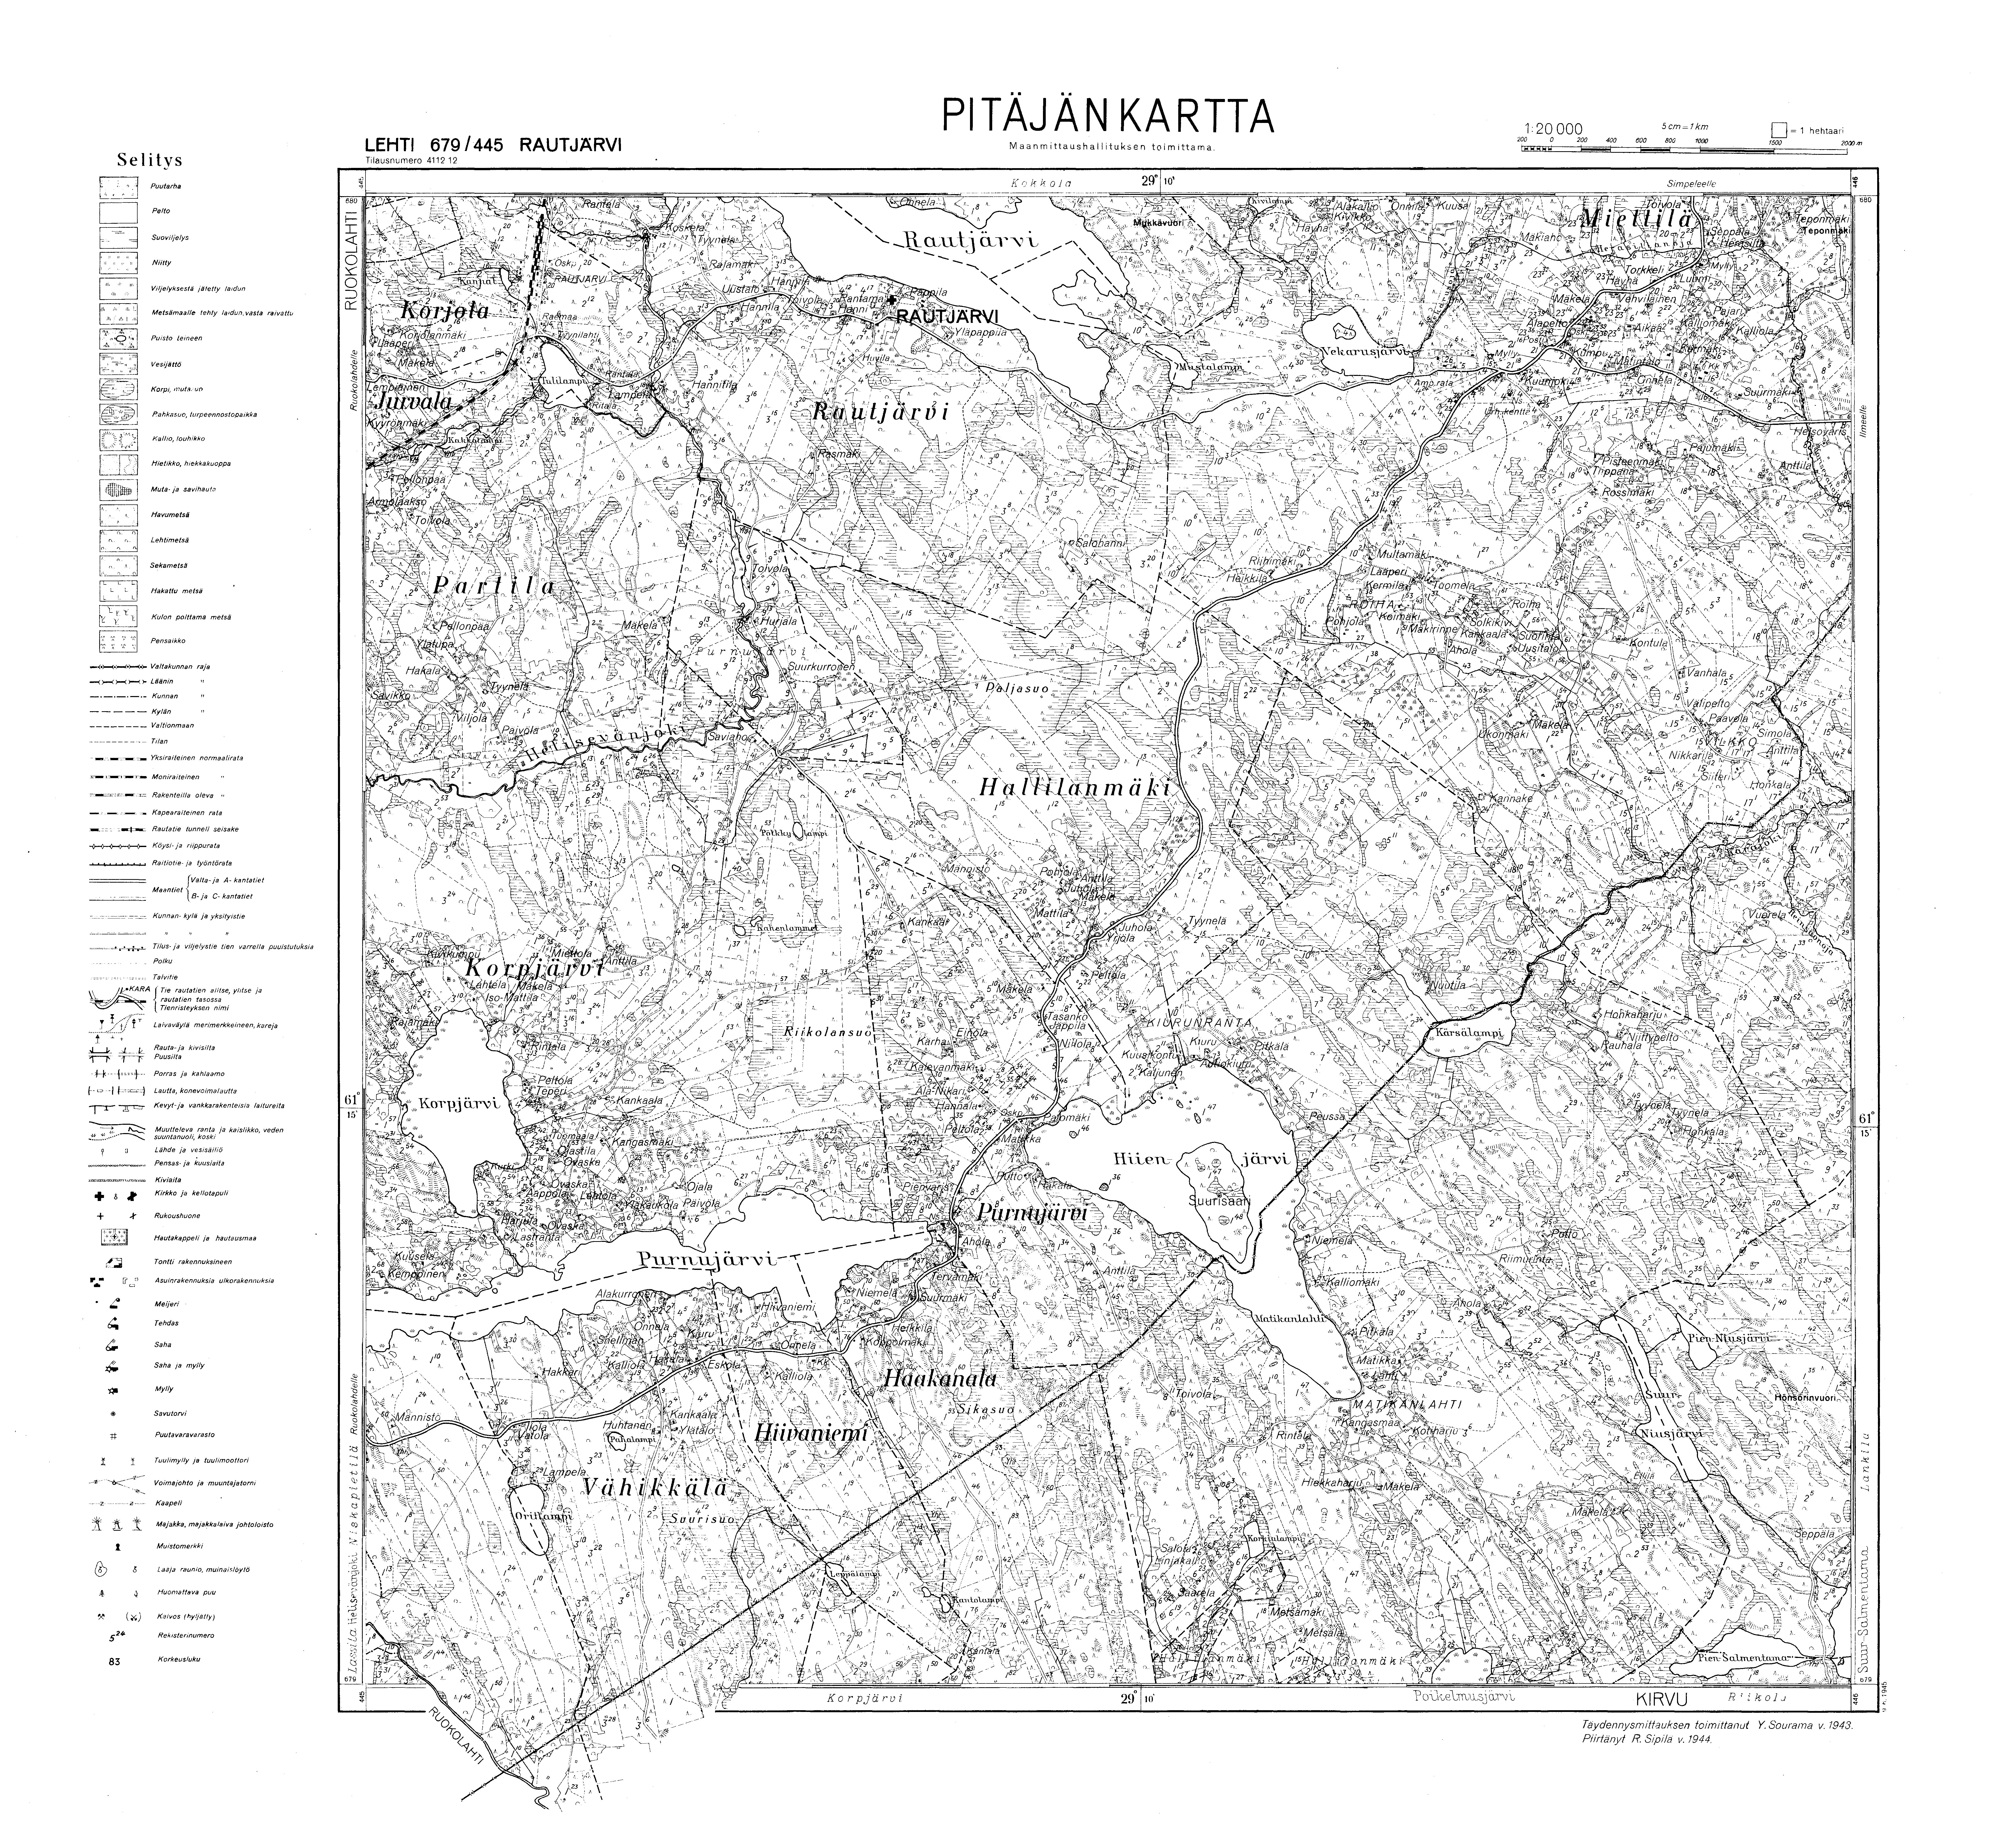 Rautjärvi. Pitäjänkartta 411212. Parish map from 1944. Use the zooming tool to explore in higher level of detail. Obtain as a quality print or high resolution image